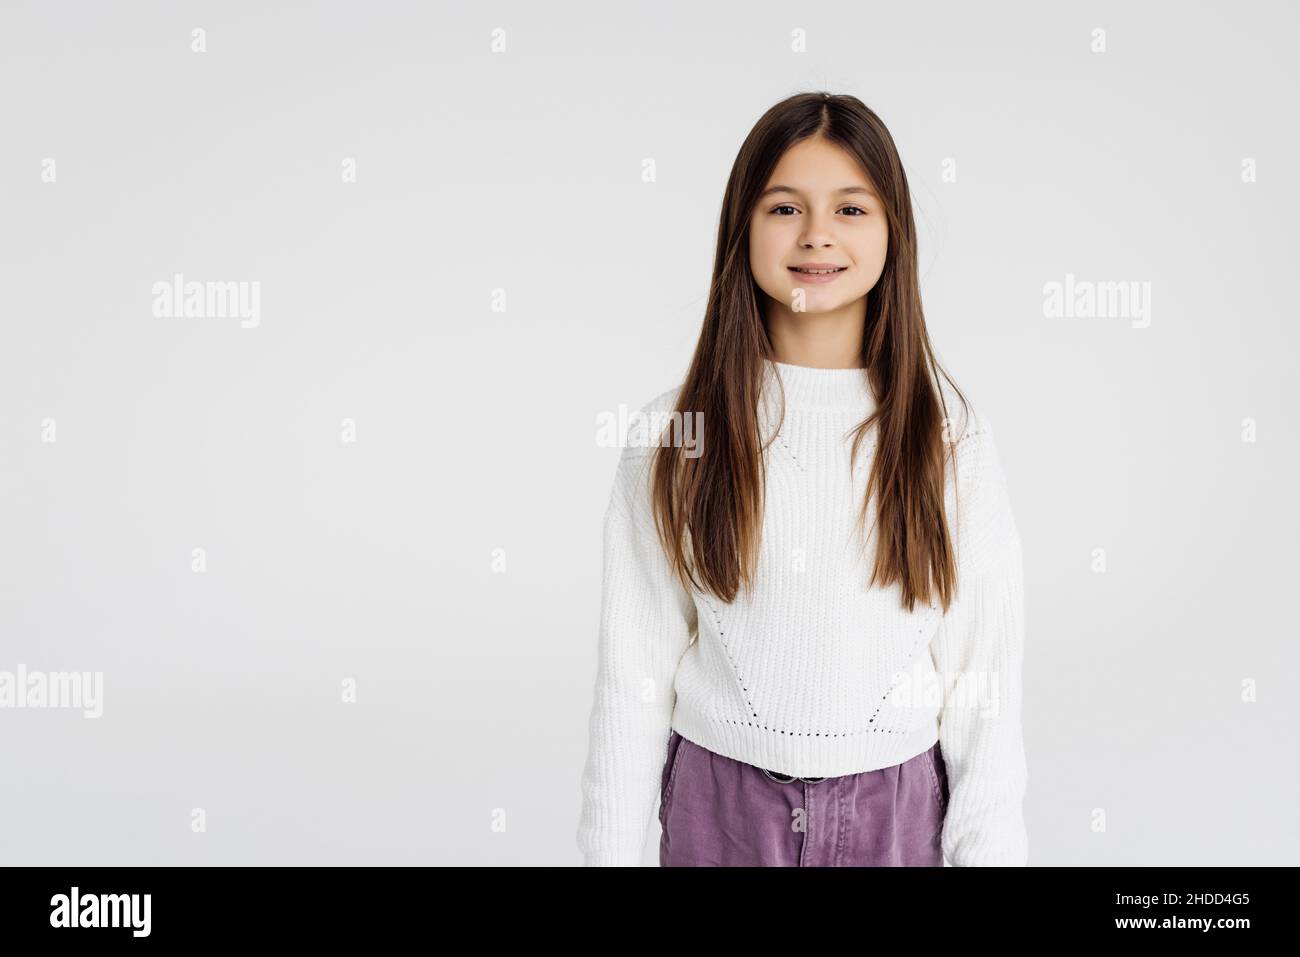 Cute teen girl standing on white background Stock Photo - Alamy